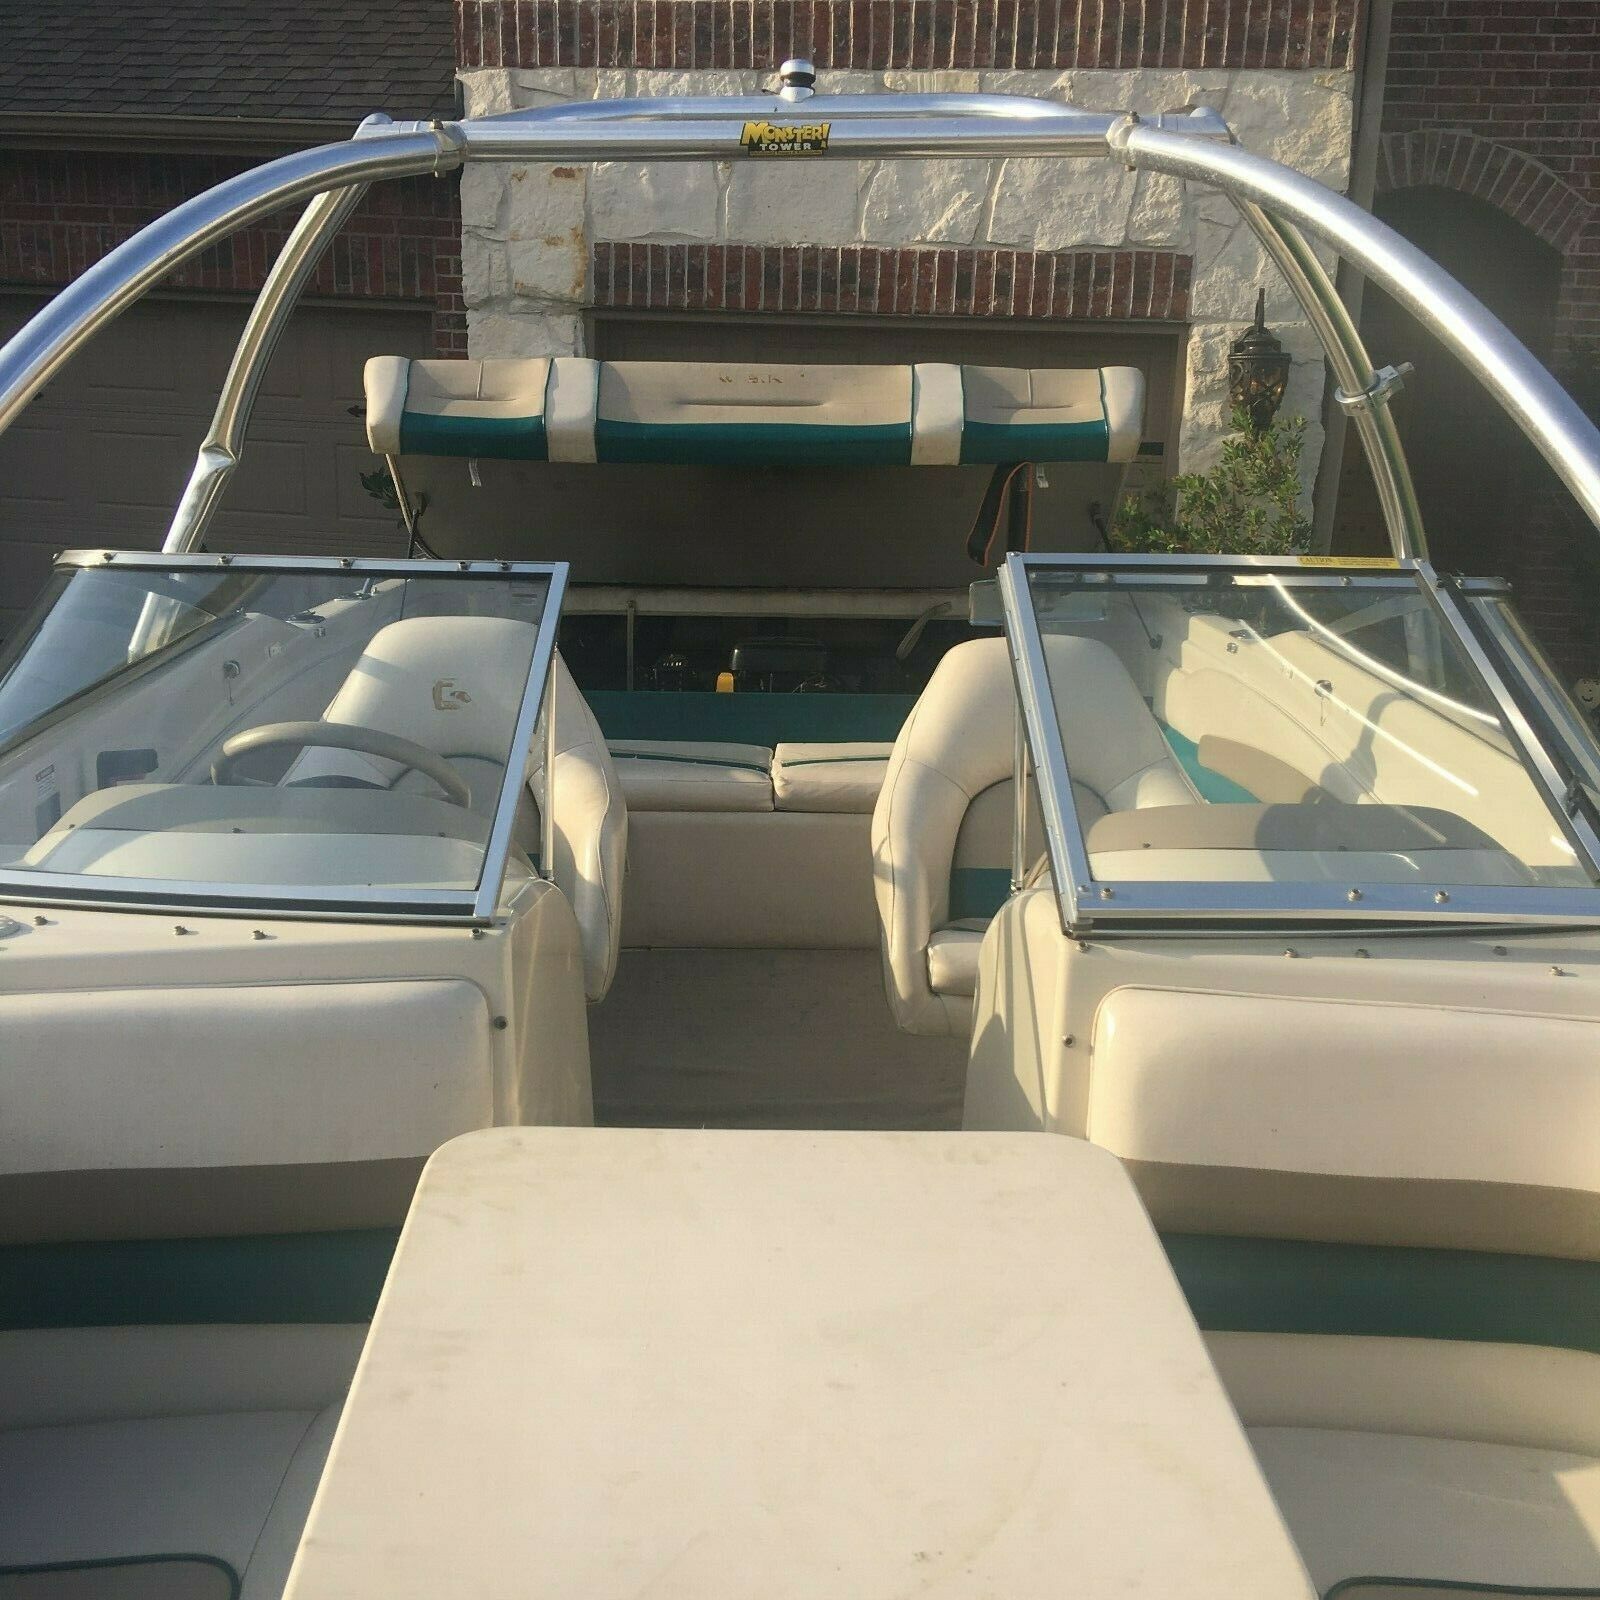 22' Glastron 1999 for sale for $200 - Boats-from-USA.com